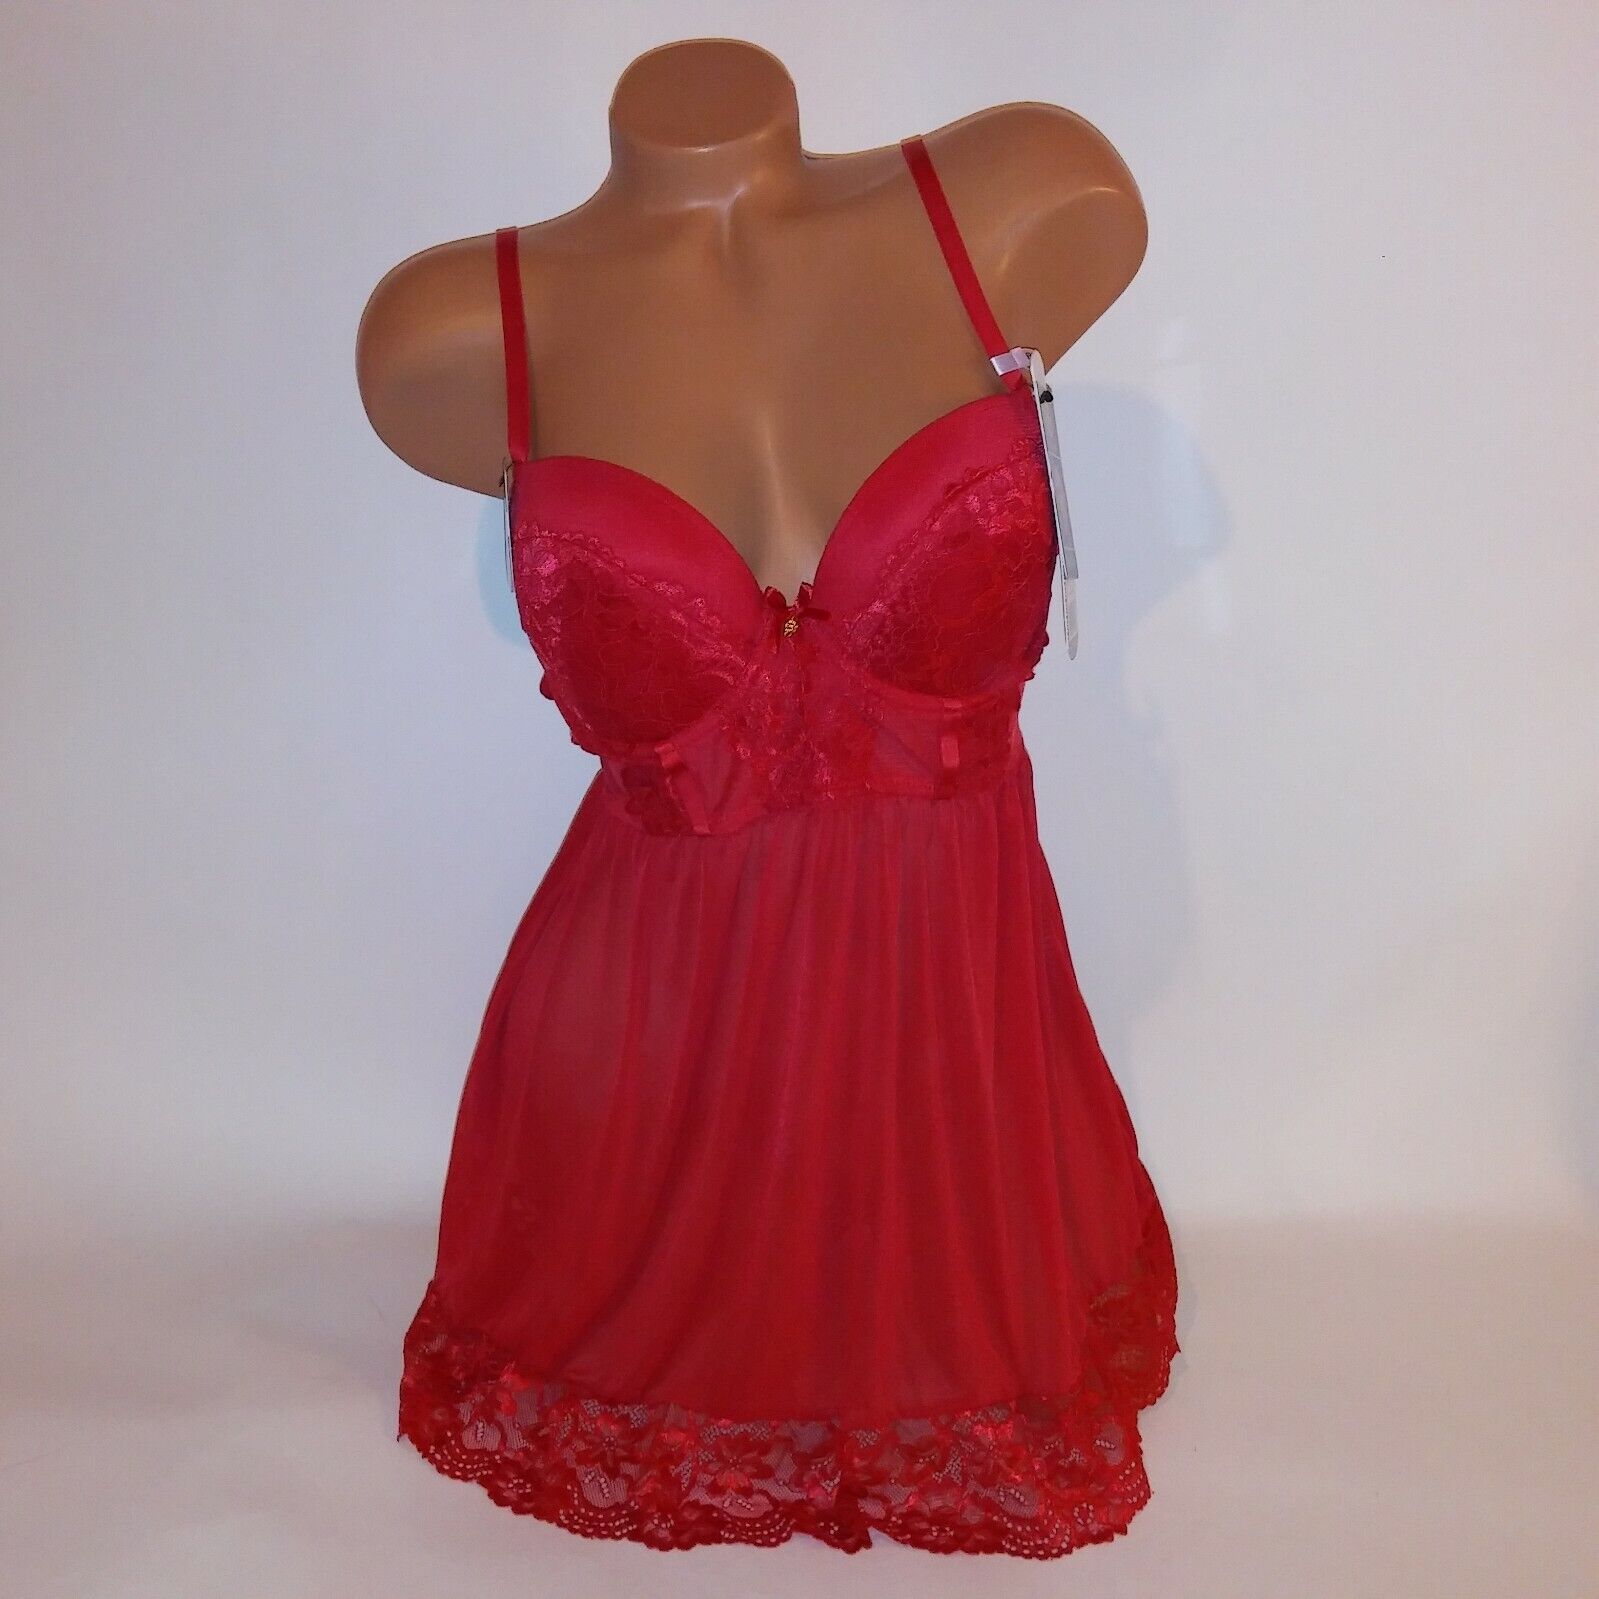 Daisy Fuentes NWOT Size 36C Cherry Red Floral Jacquard Lace